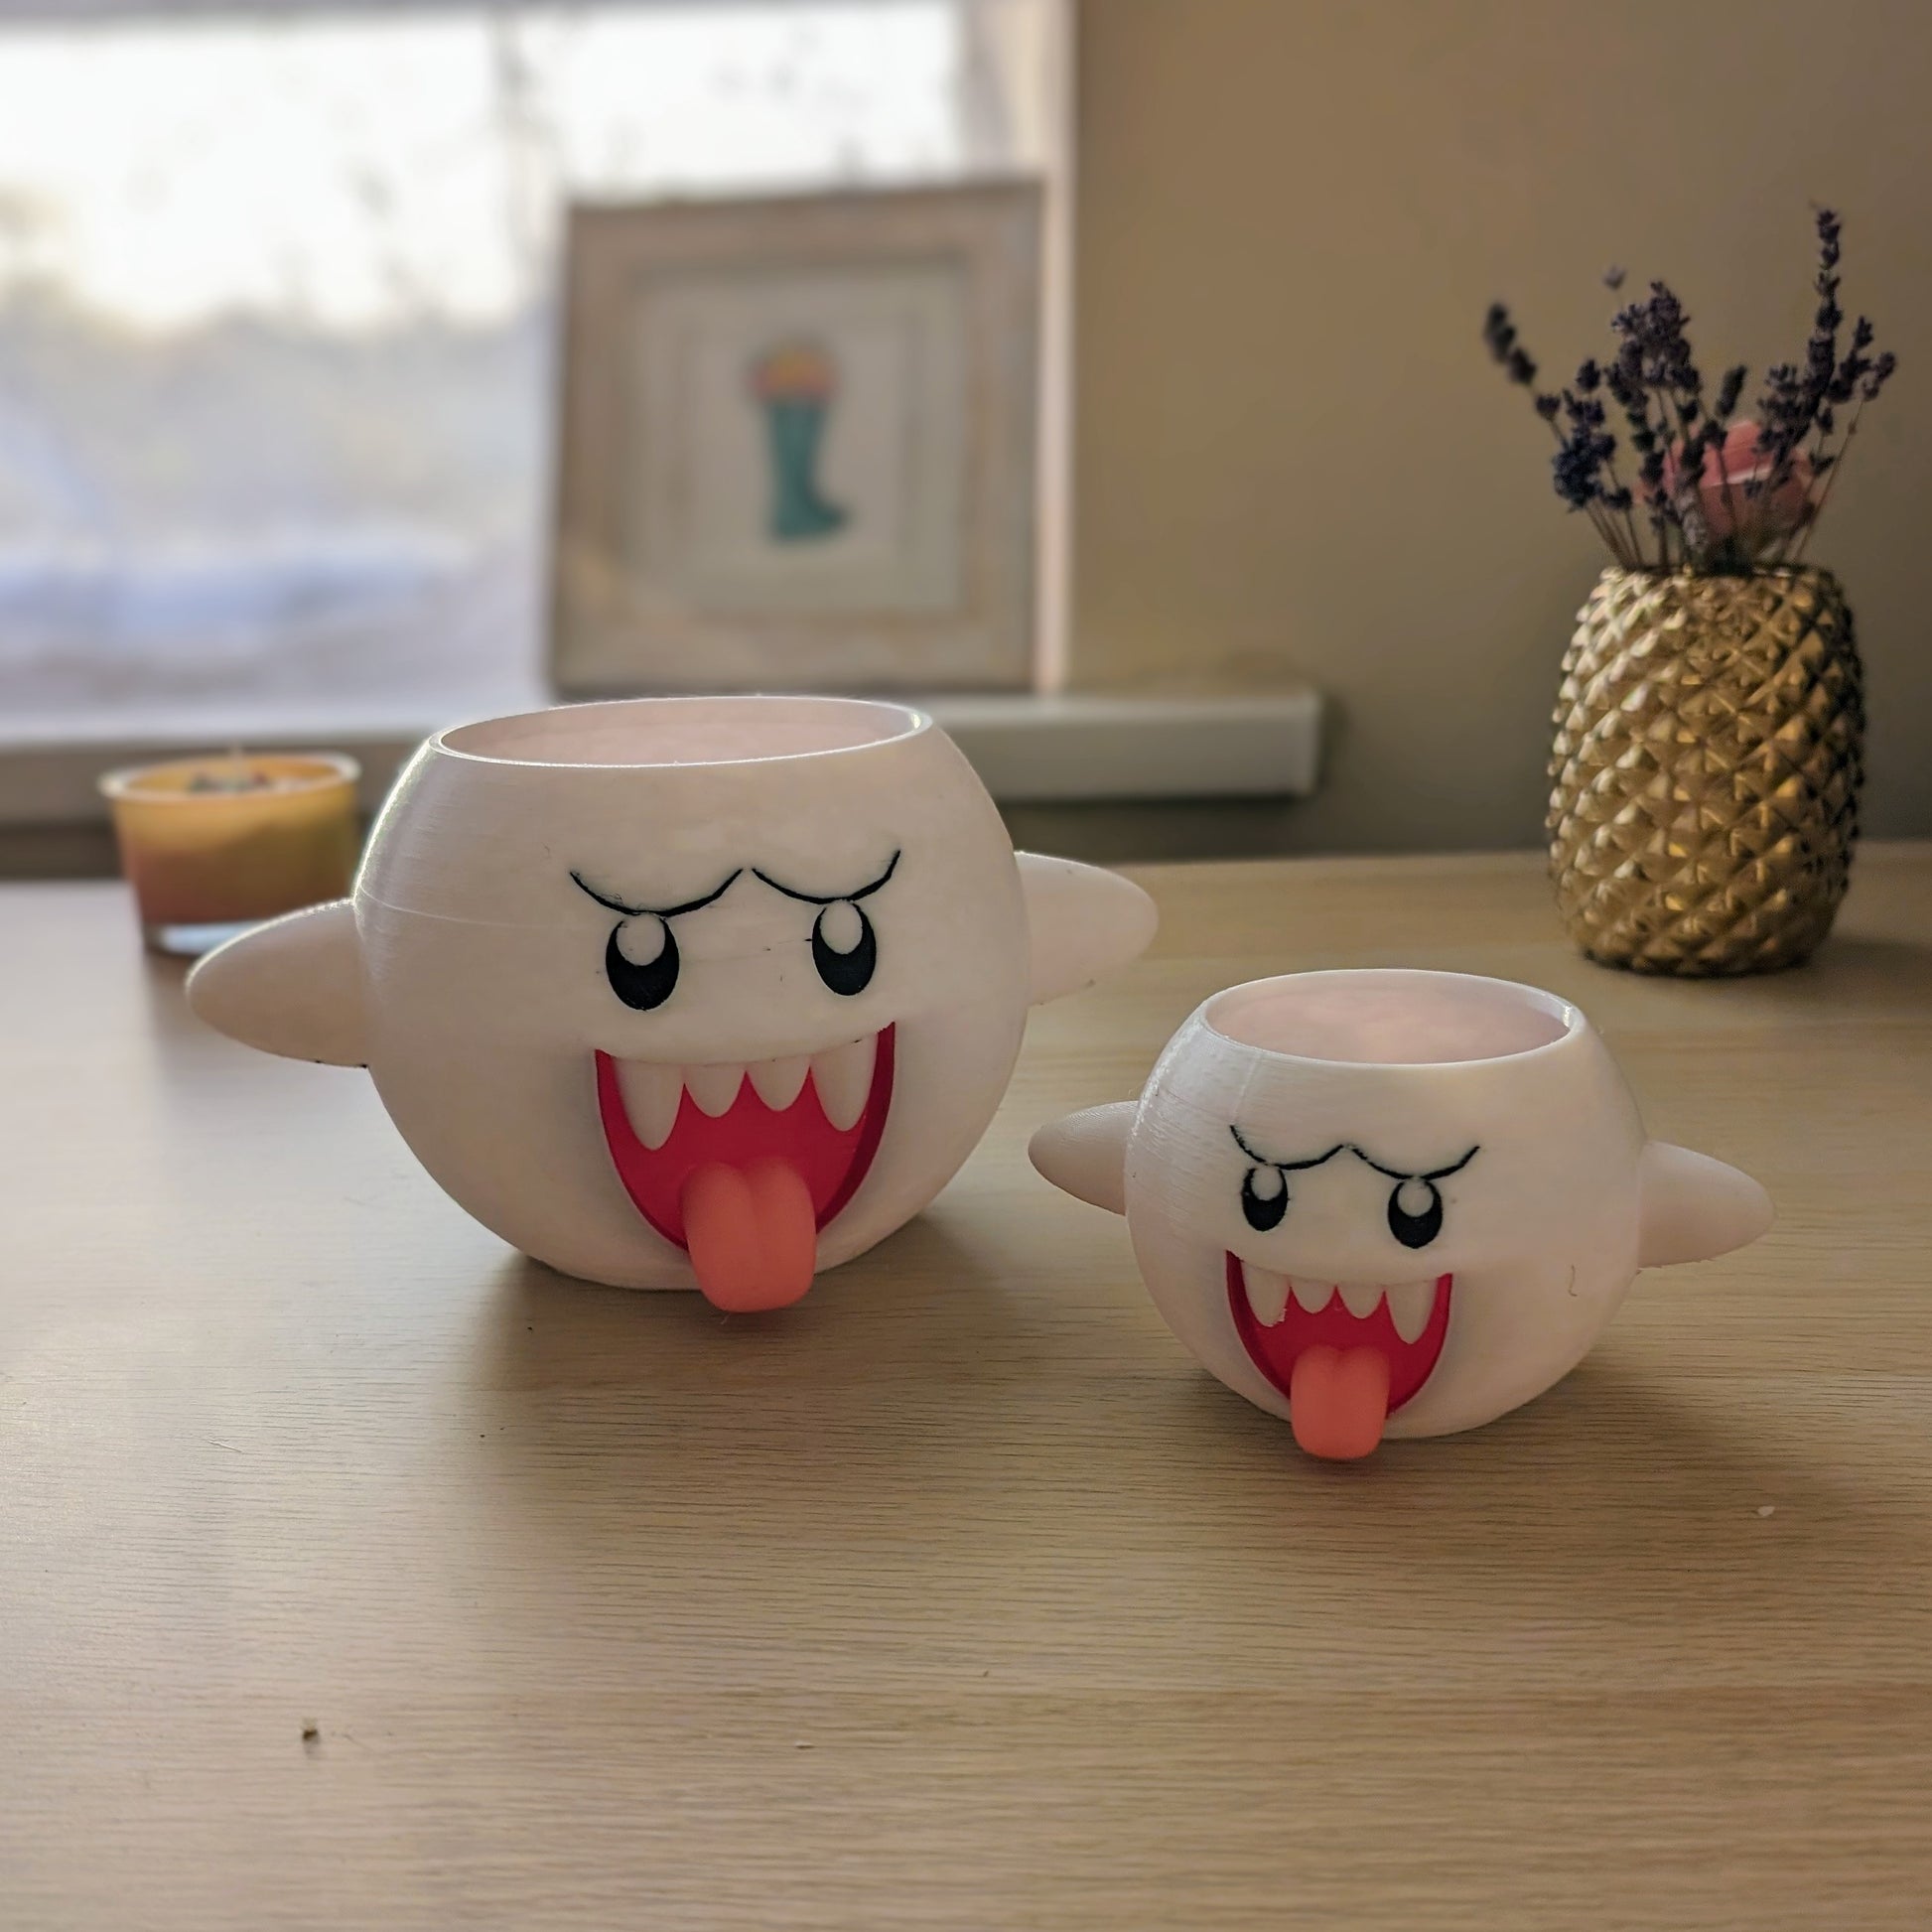 Mario Boo planter in two sizes on desk without plants